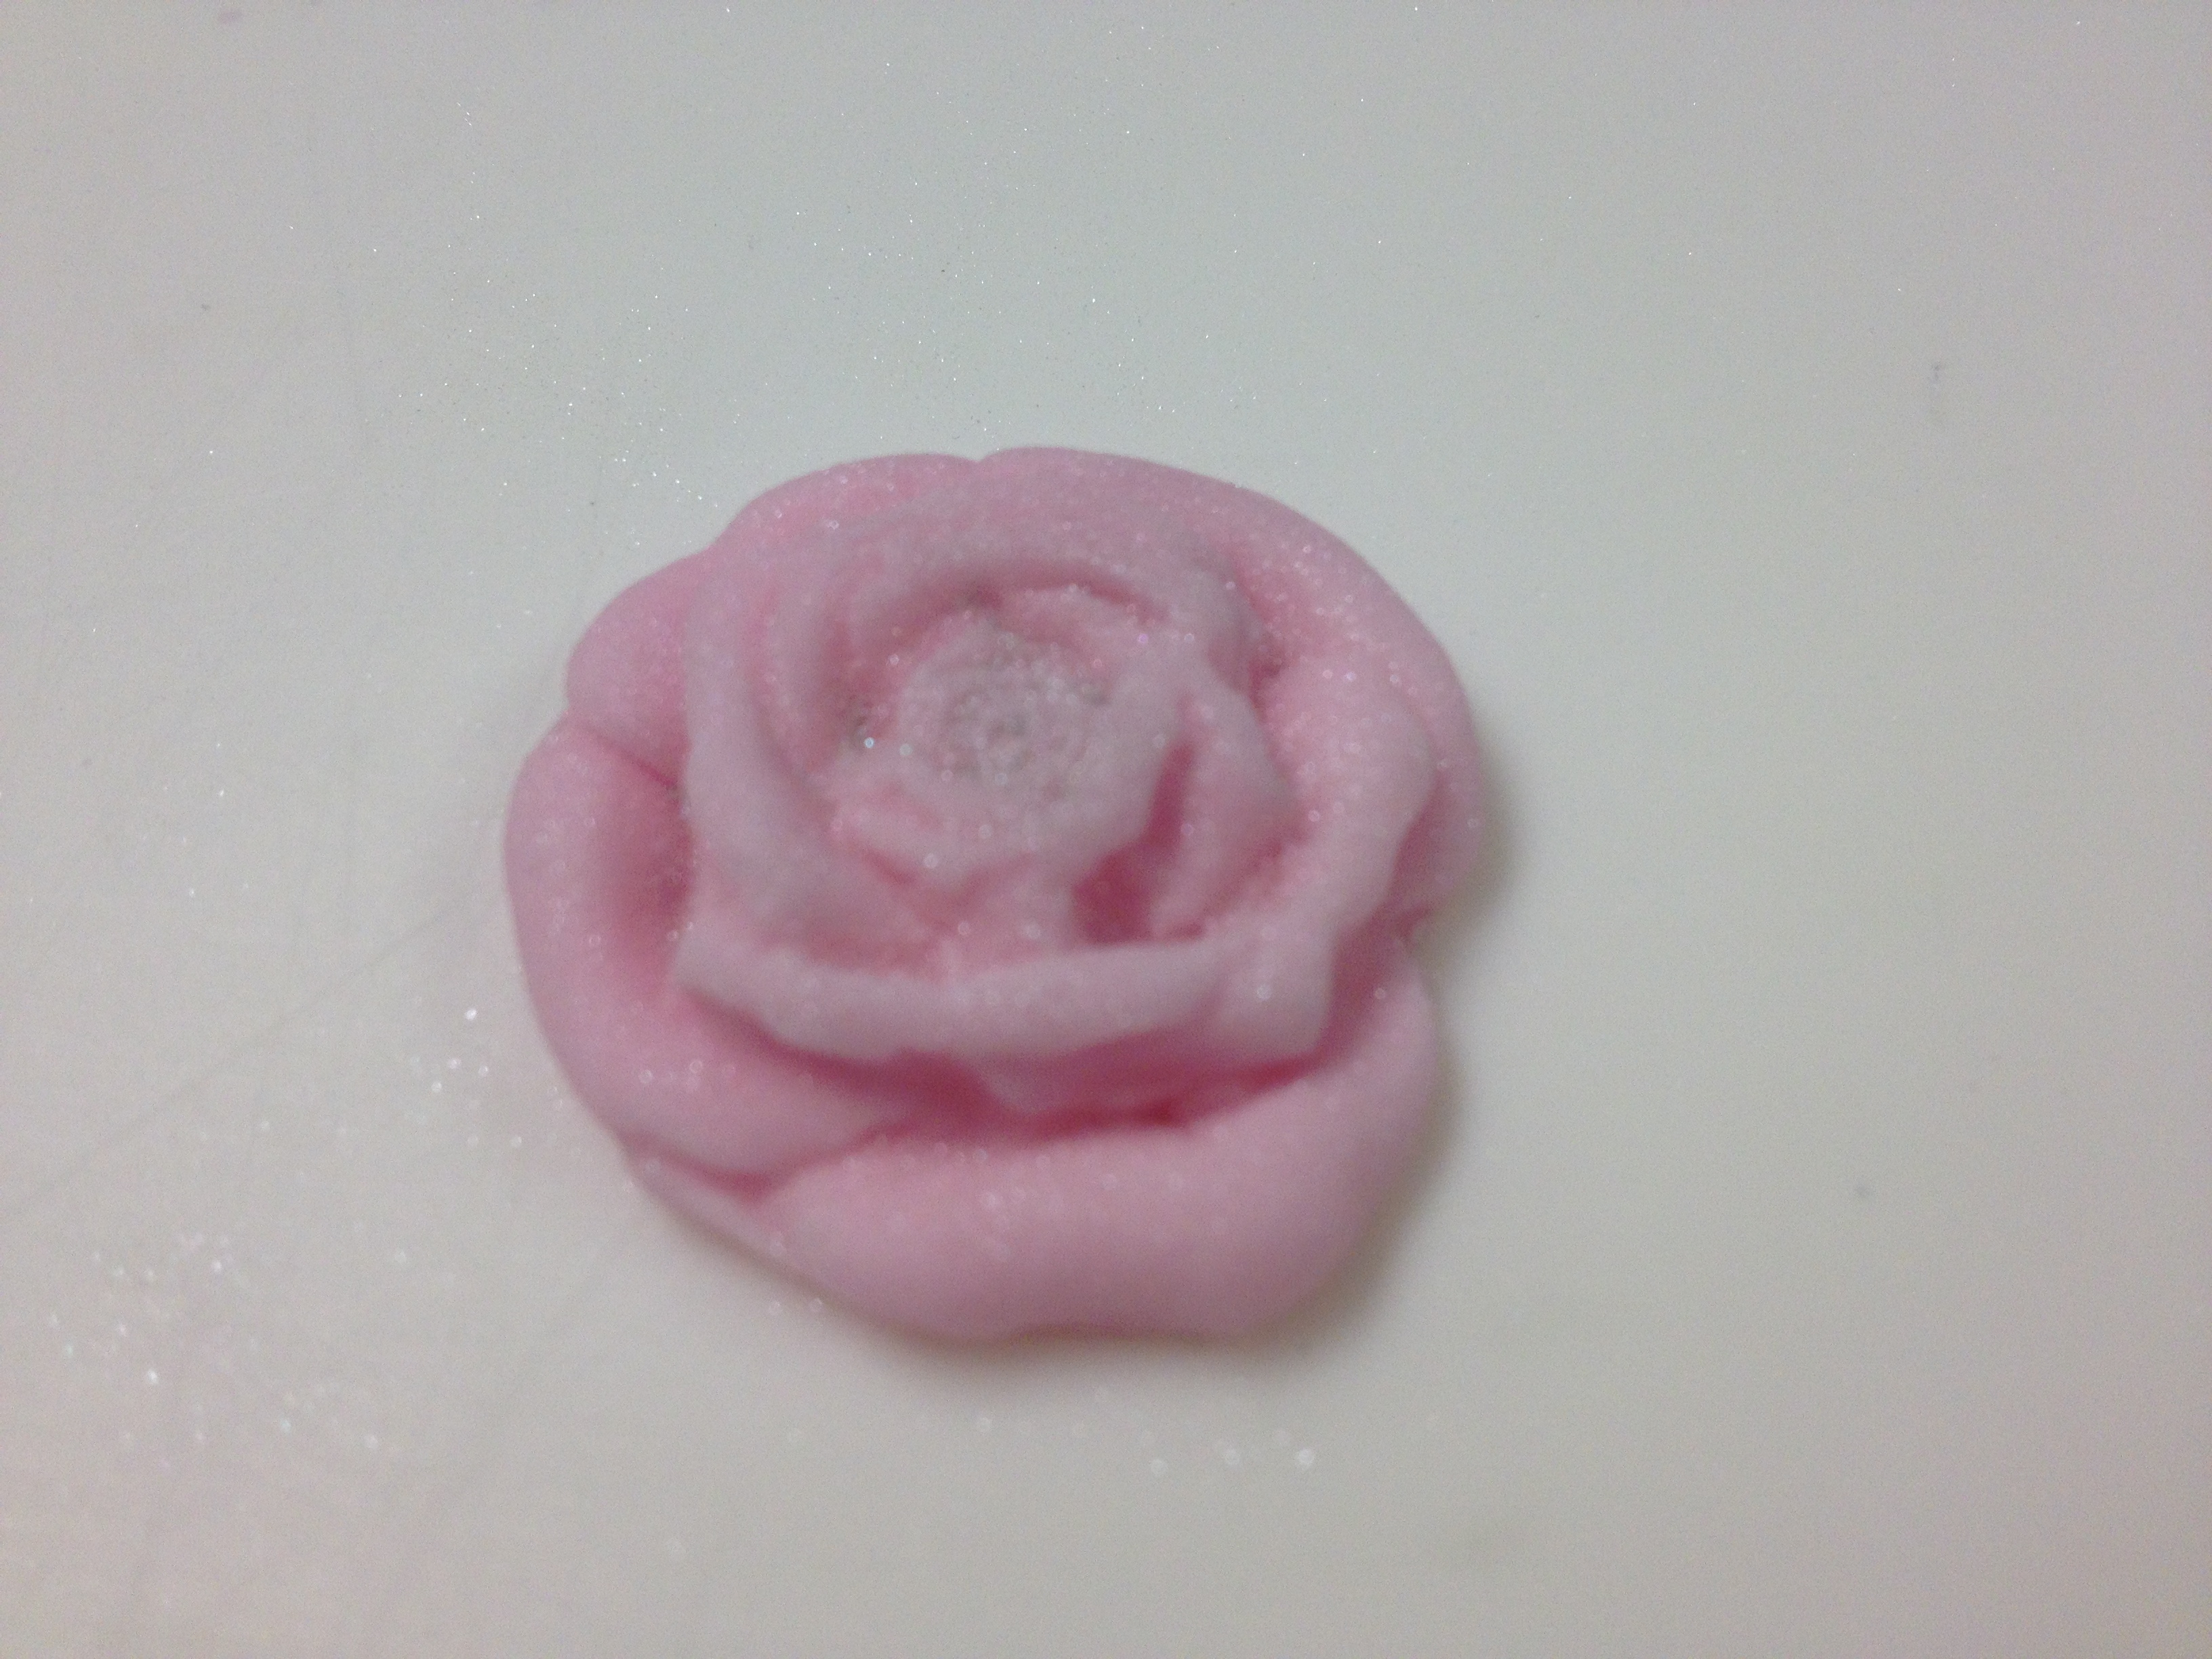 How To: Make Icing Flowers from Moulds